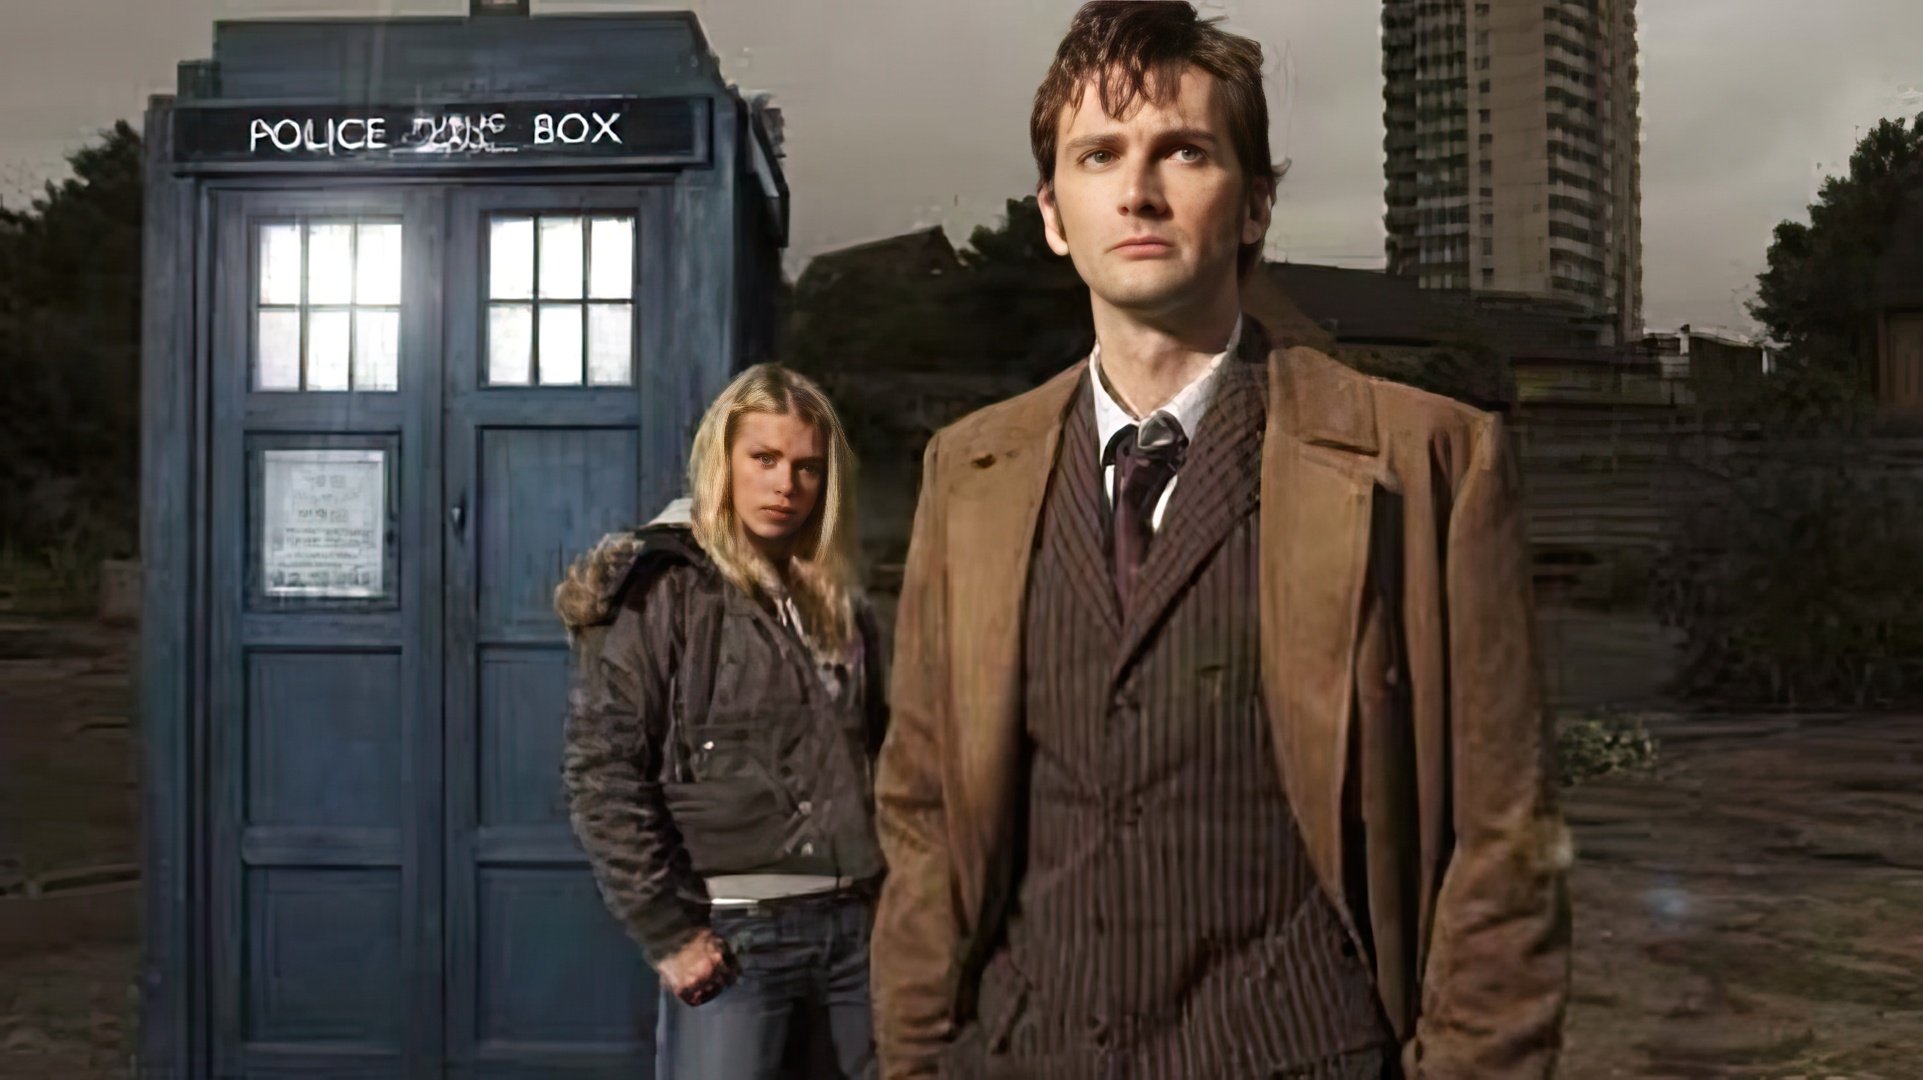 In 2005, David Tennant got the role of the Doctor